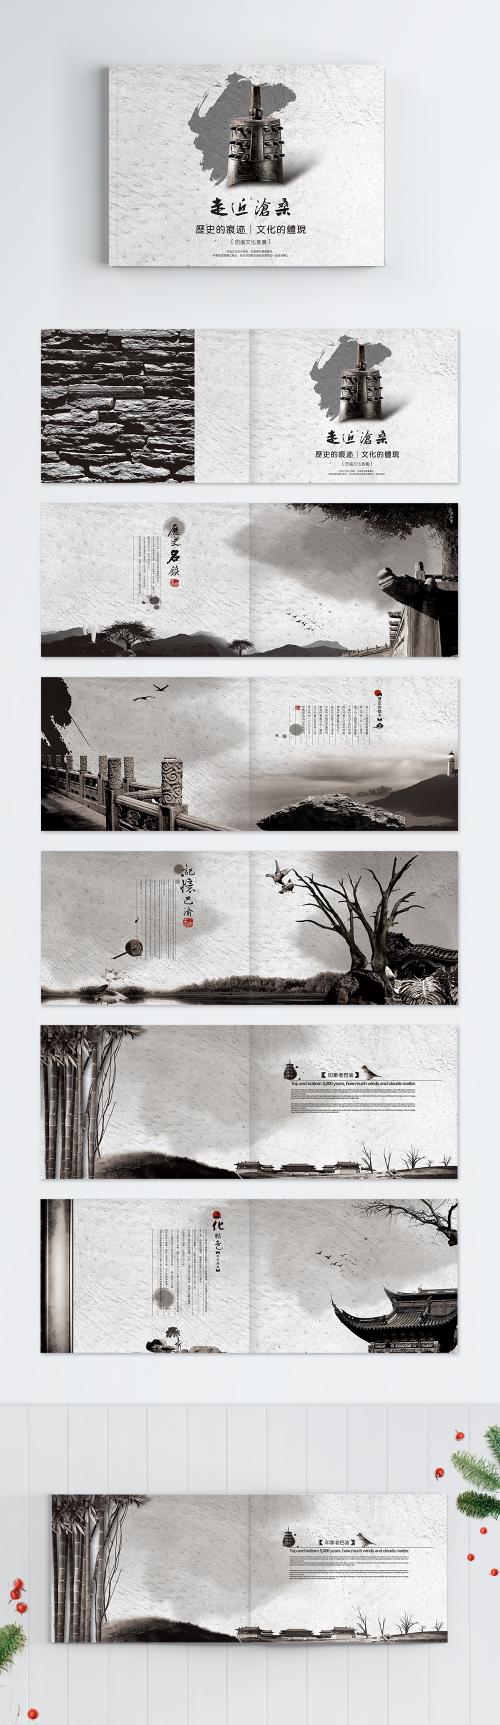 LovePik - high end atmosphere chinese wind tourism brochure - 400227387